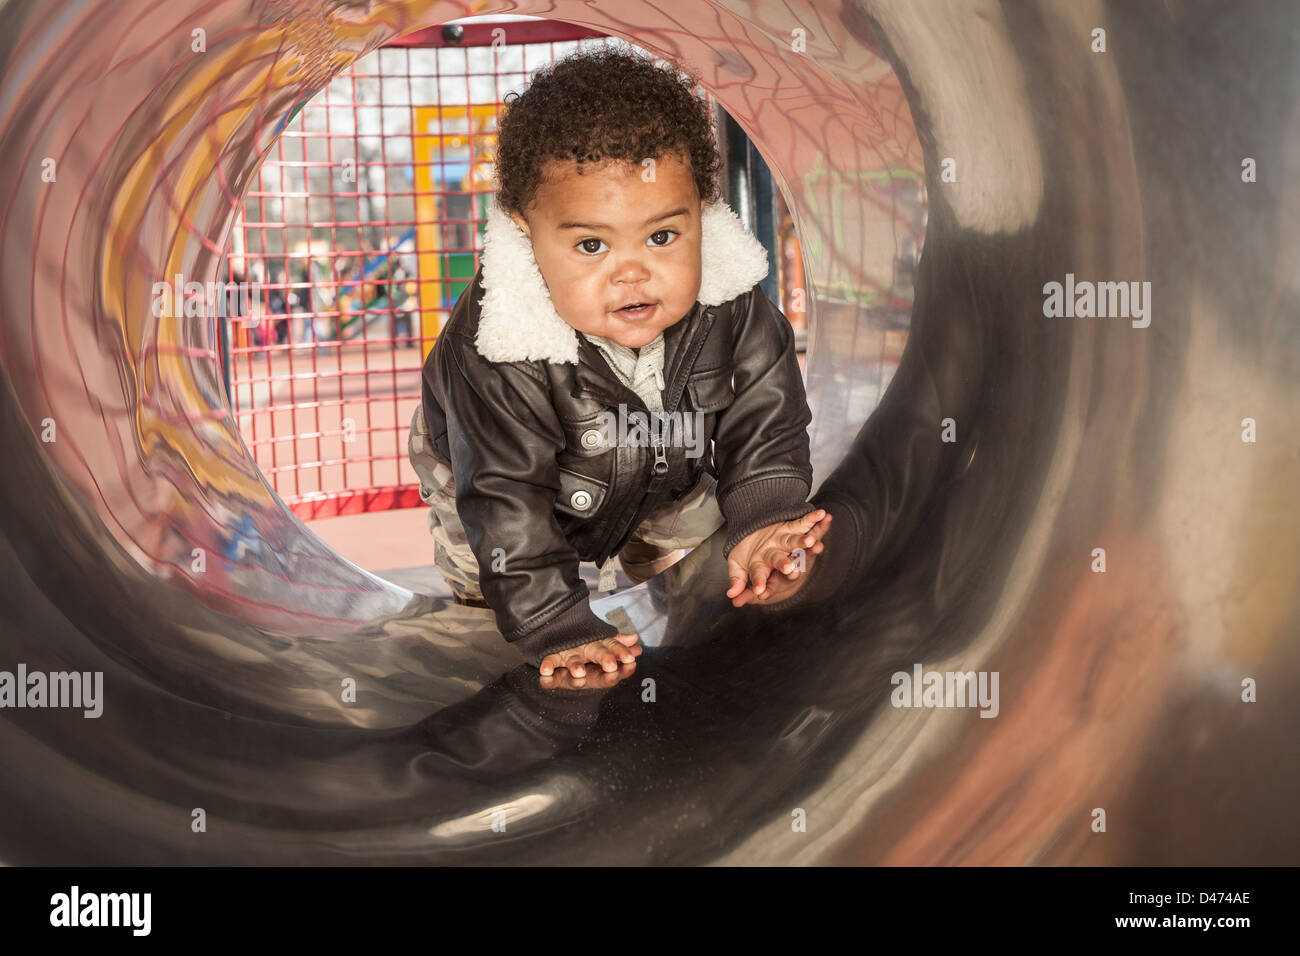 Mixed race toddler baby  playing in metal tunnel at the park wearing aviator jacket crawling on all fours Stock Photo